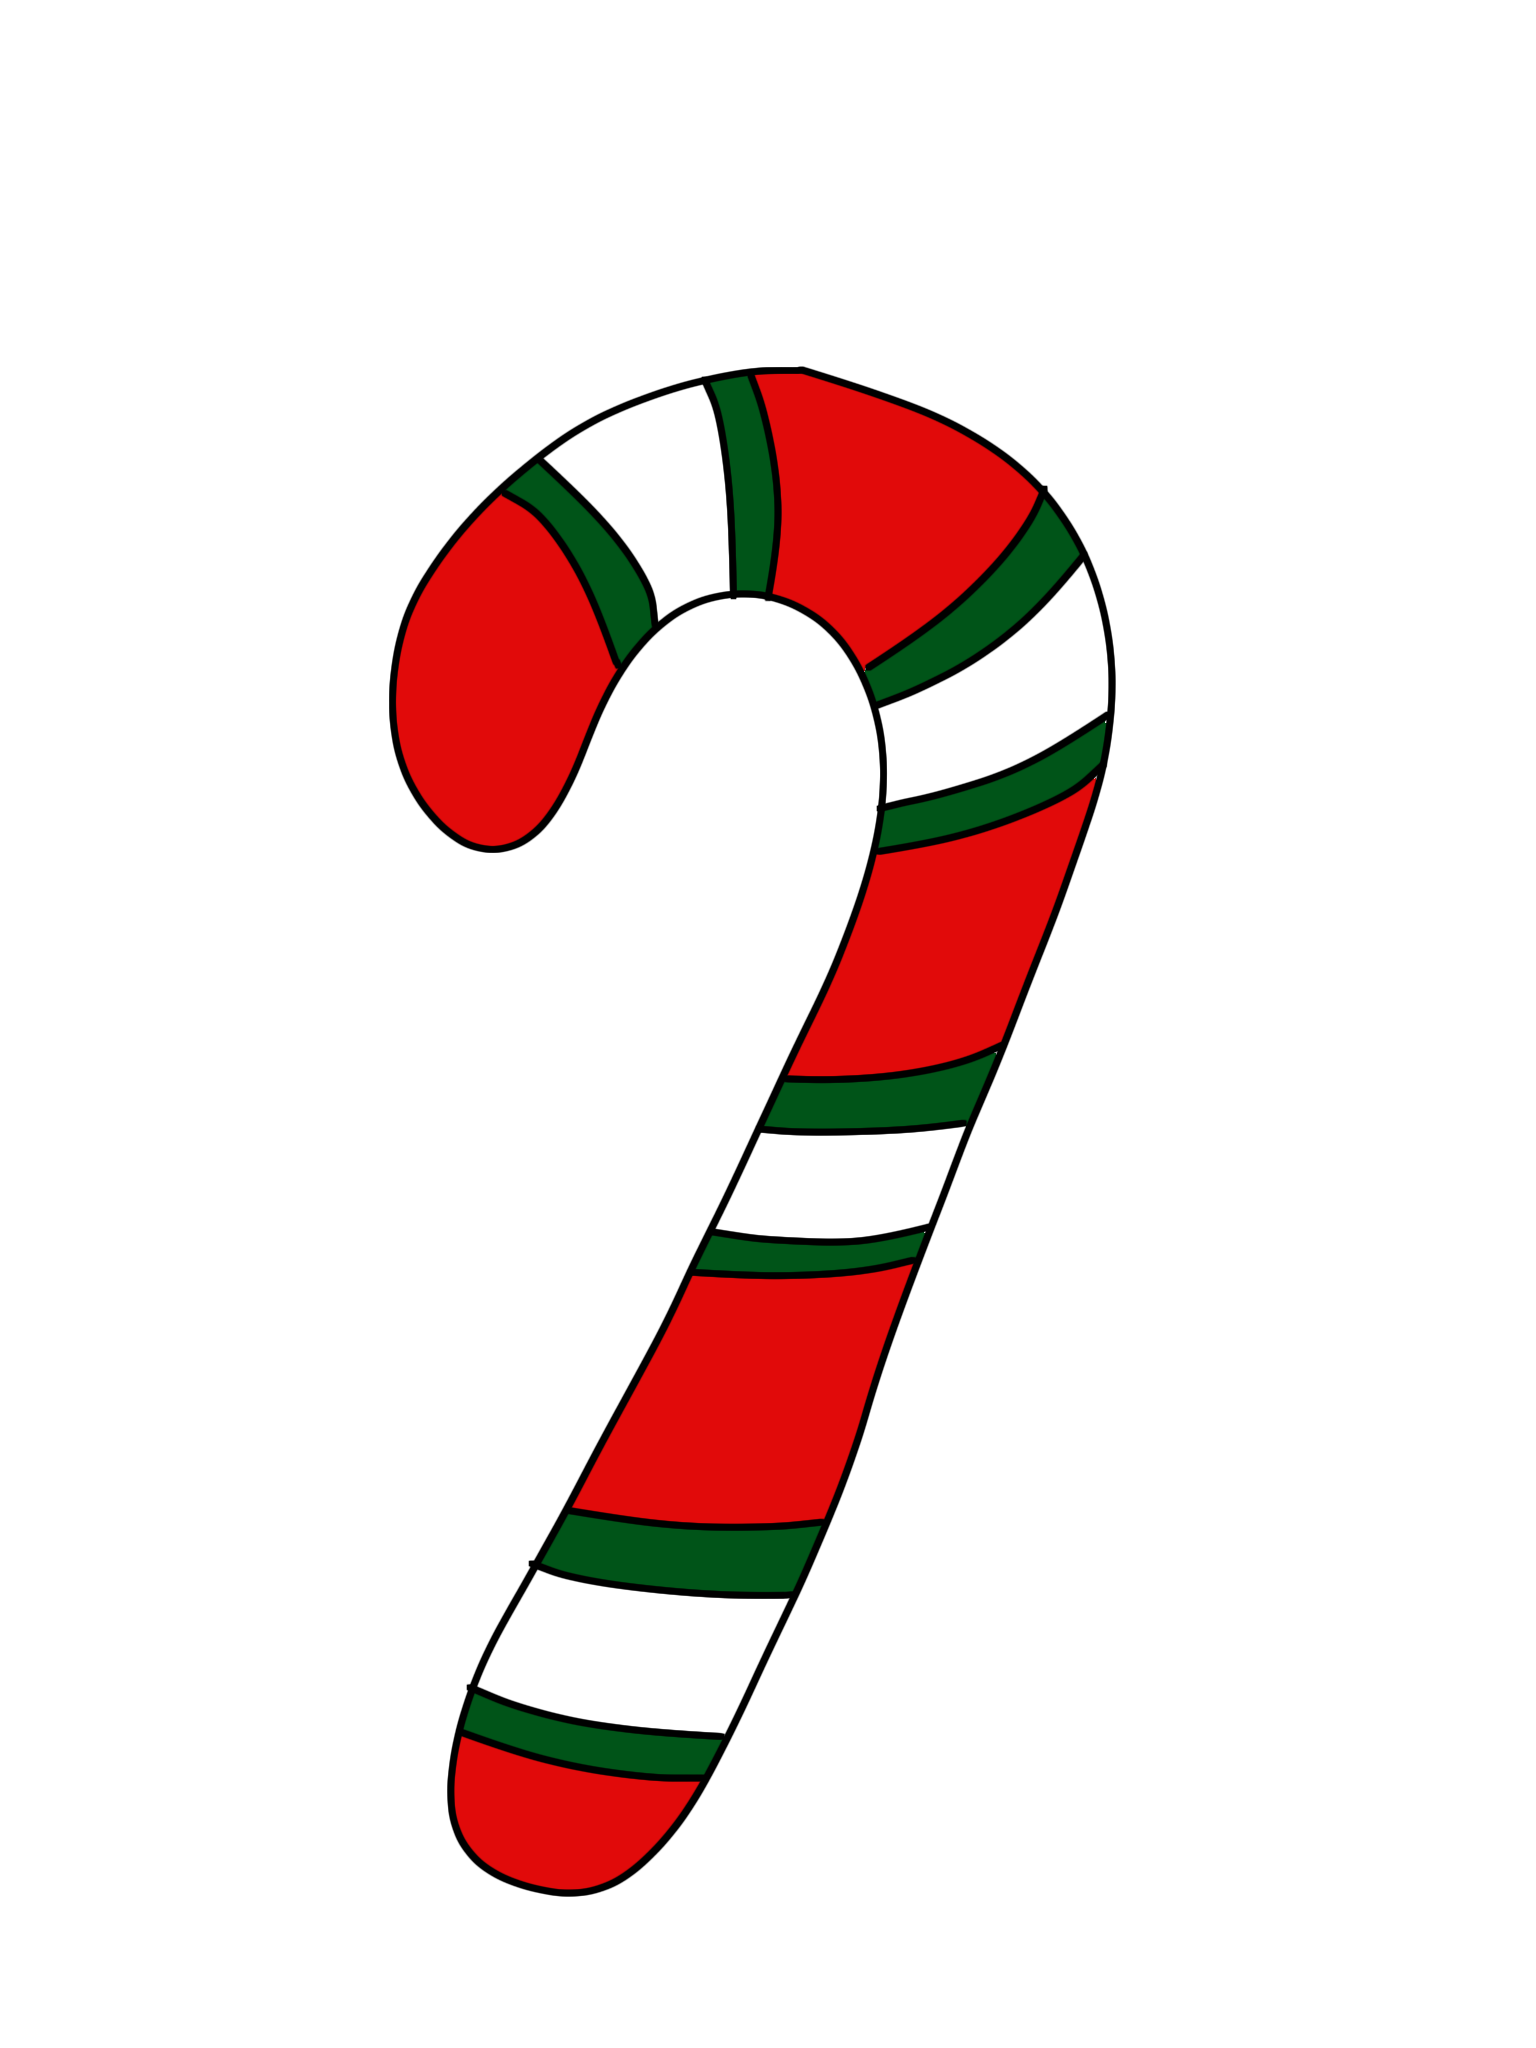 Picture Of Candy Cane | Free Download Clip Art | Free Clip Art ...